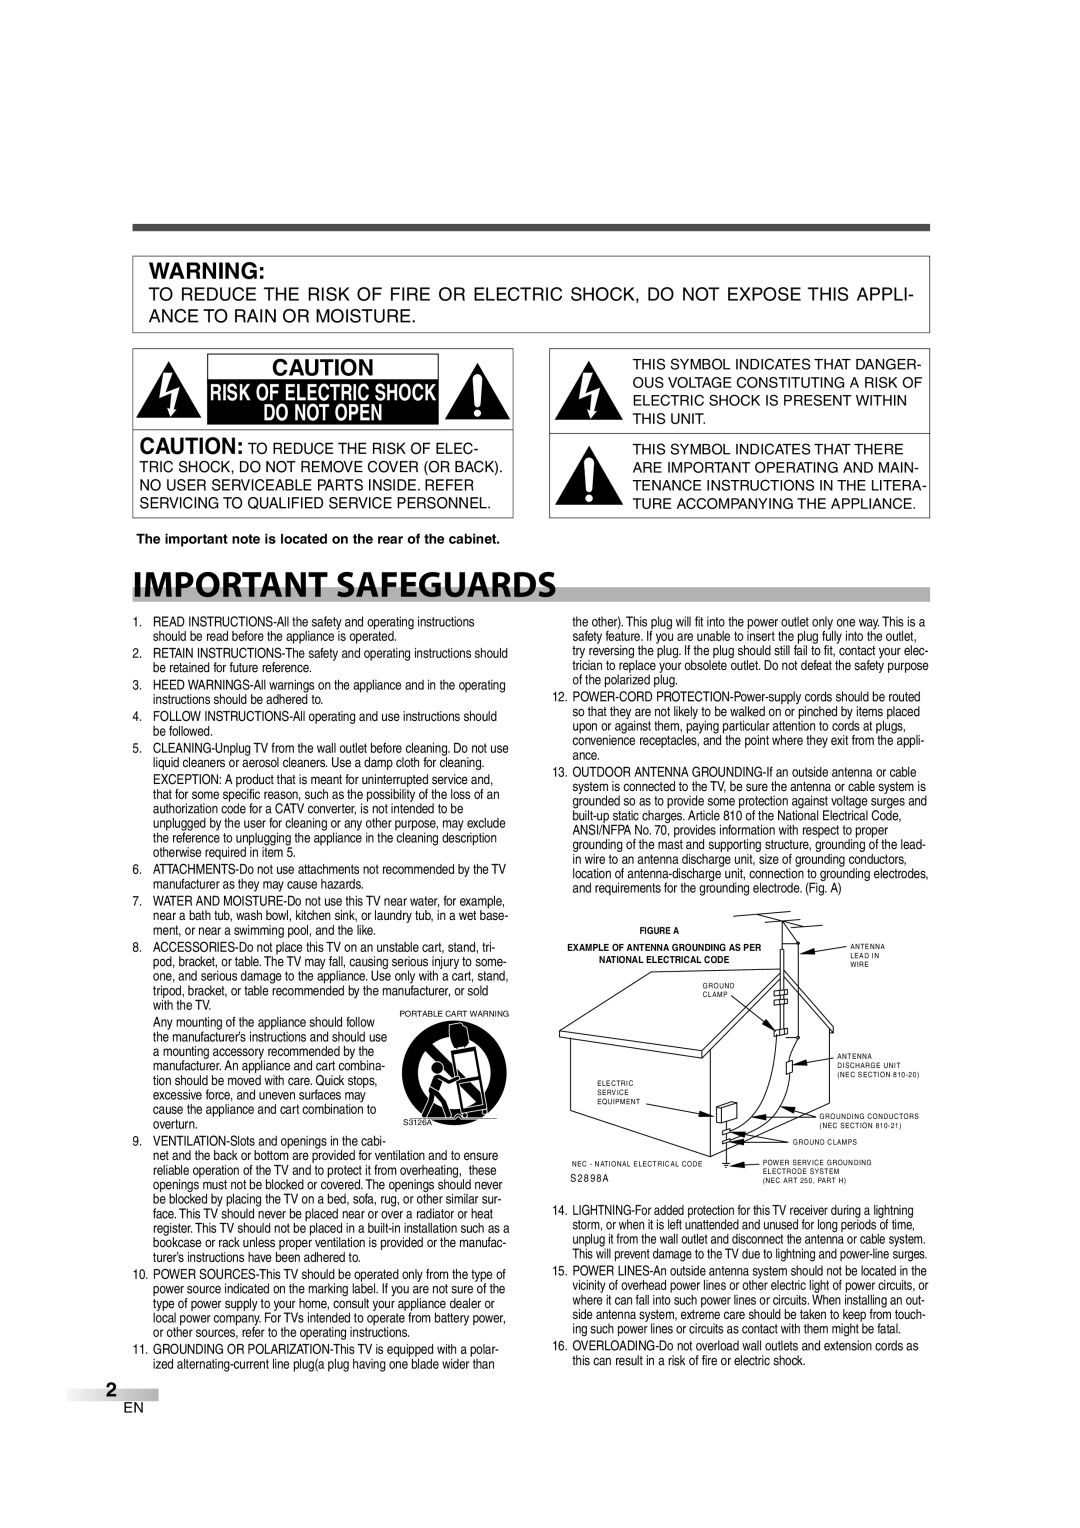 FUNAI CIWL3206 owner manual Risk Of Electric Shock Do Not Open, Important Safeguards 